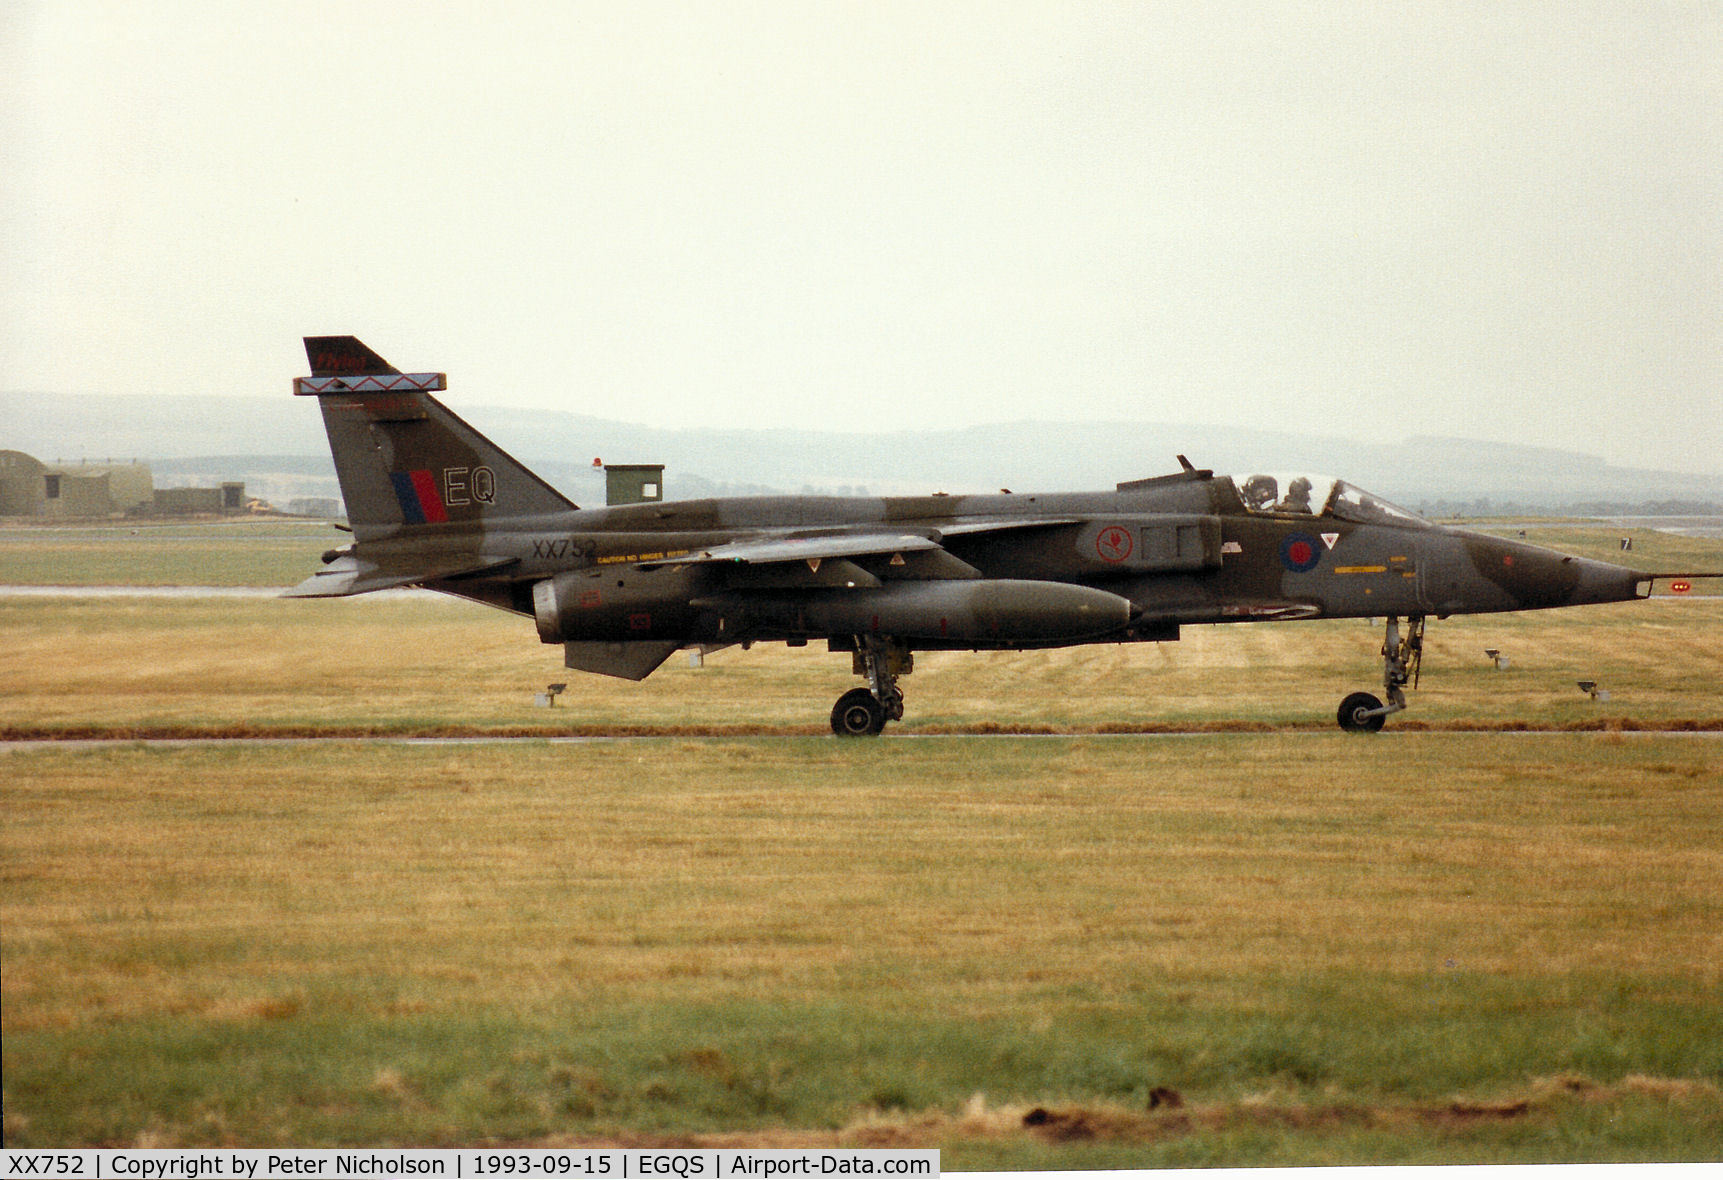 XX752, 1975 Sepecat Jaguar GR.1A C/N S.49, Jaguar GR.1A of 6 Squadron at RAF Coltishal awaiting clearance to join the active runway at RAF Lossiemouth inthe Summer of 1993.